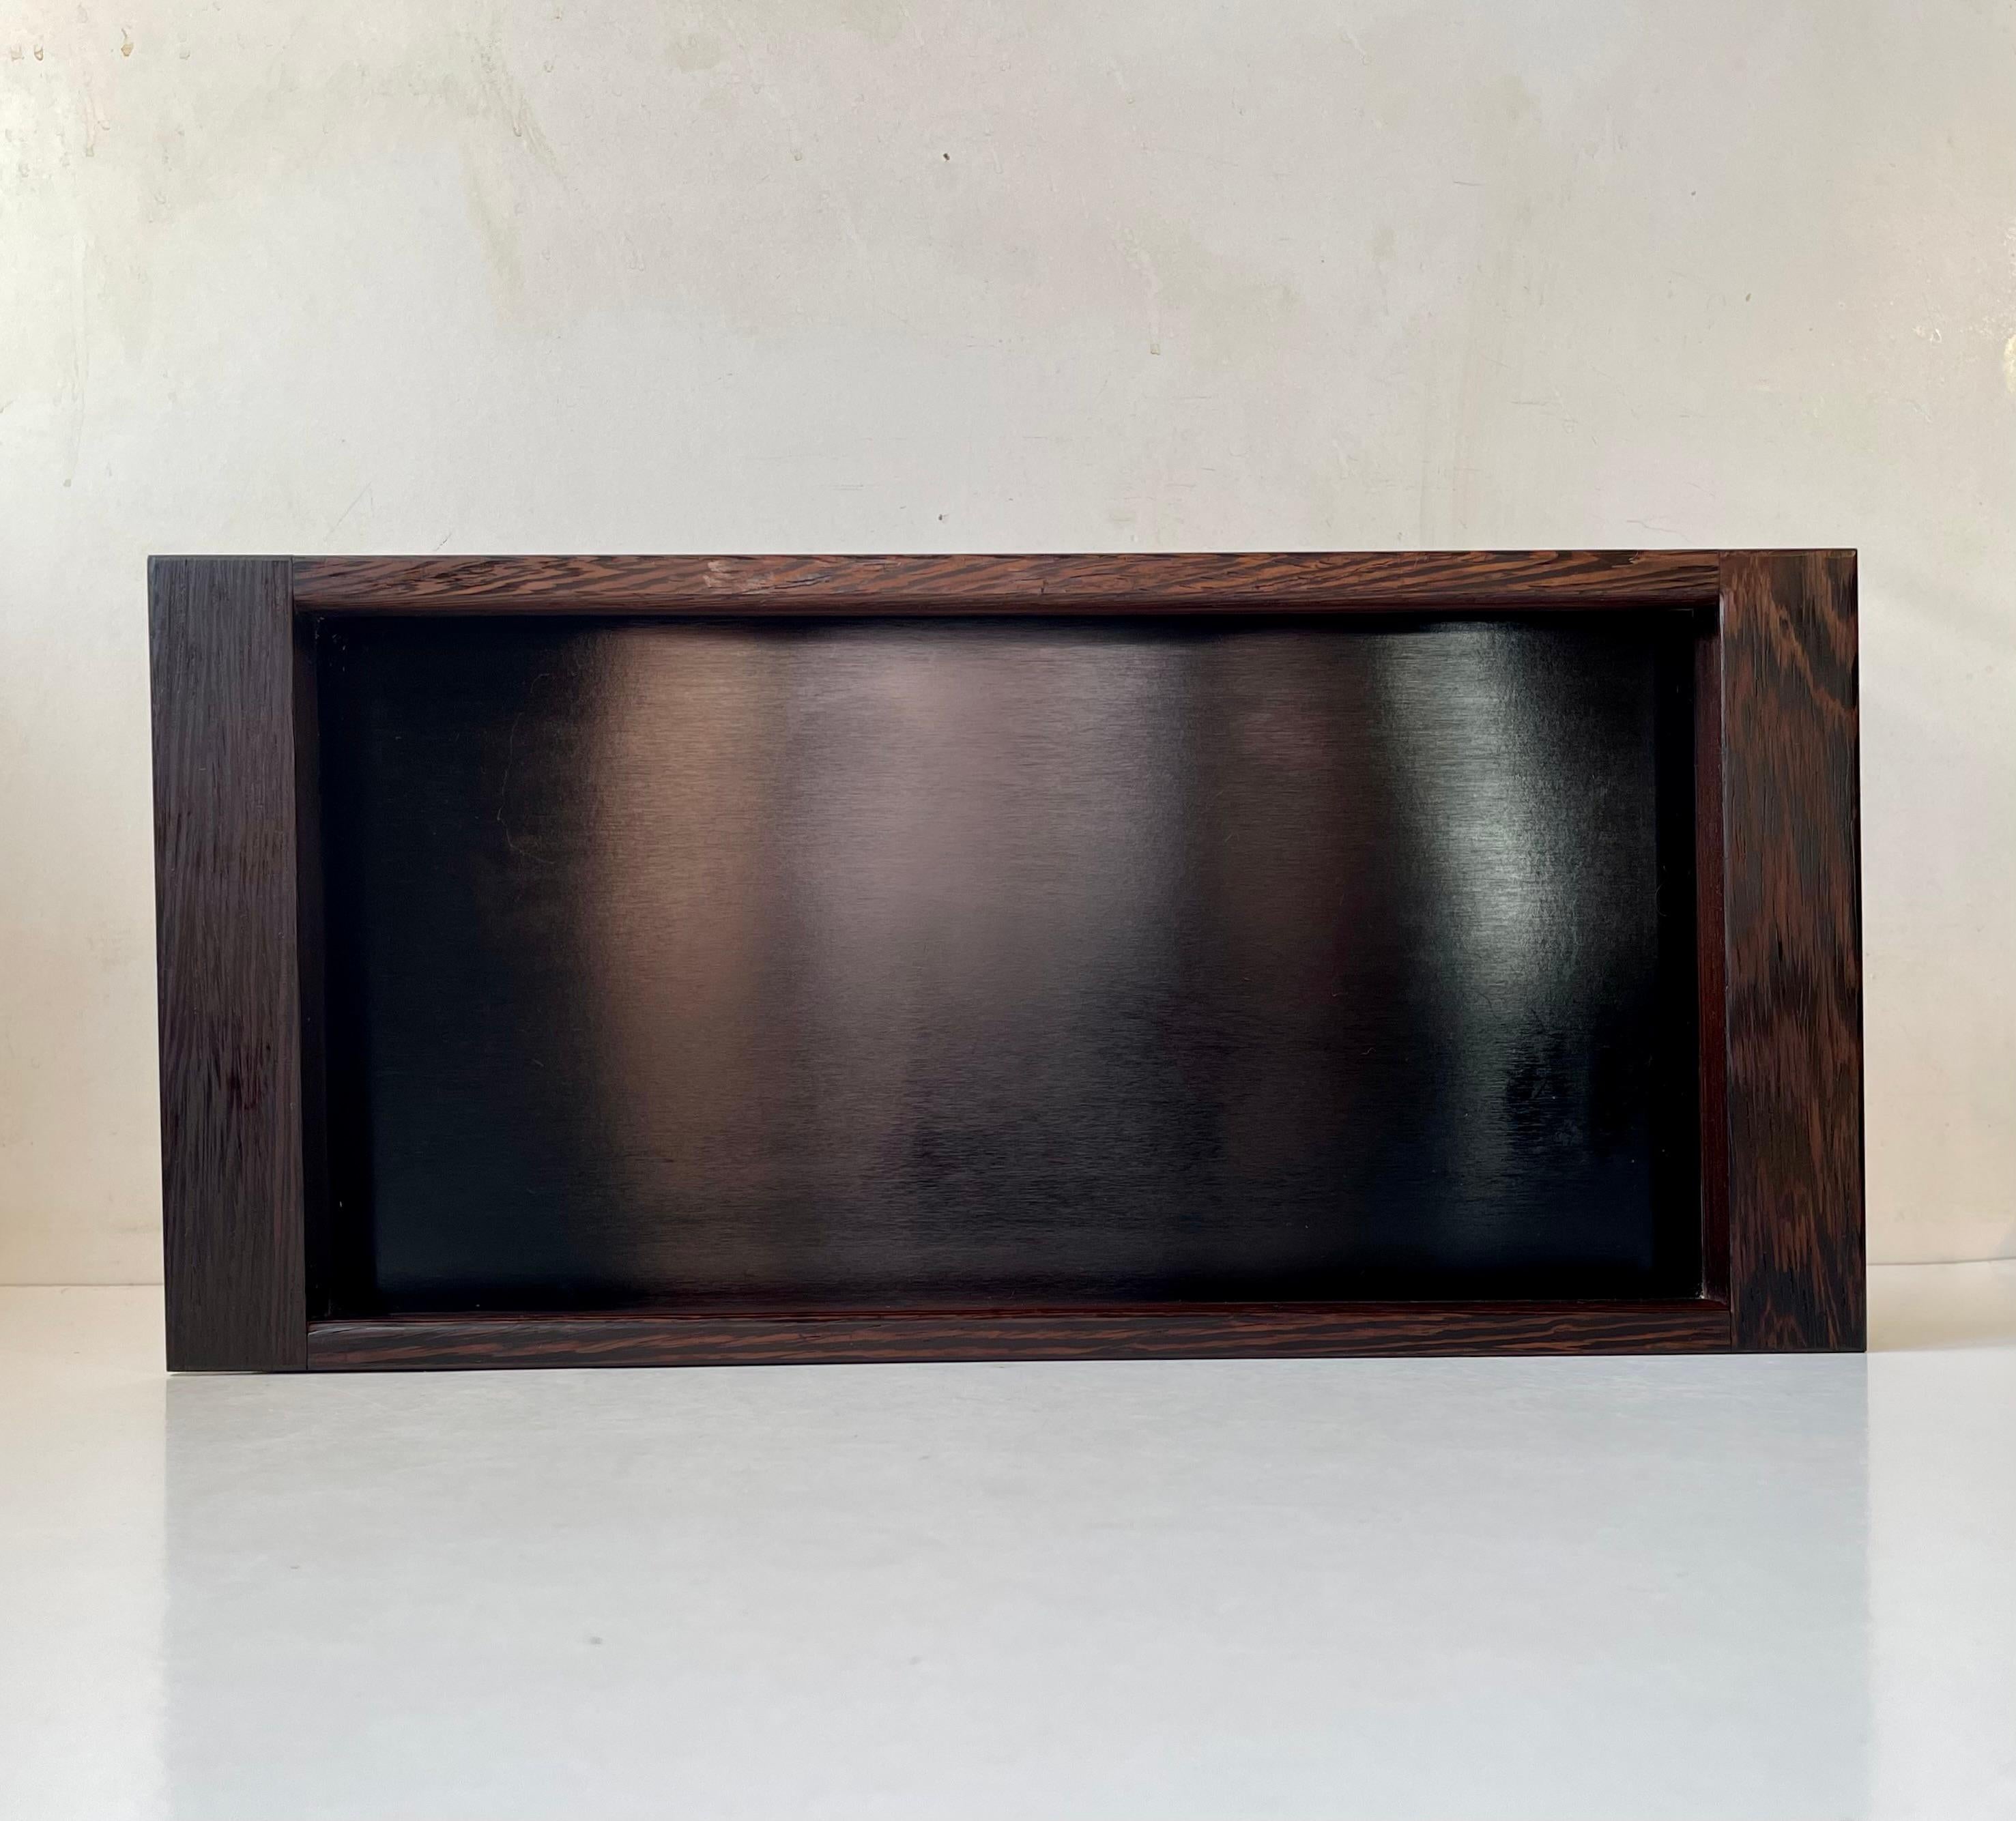 Exceptionally rare 1960s serving or decorative tray executed in Wengé wood and black formica. It was designed during the late 1950s or early 60s by Henning Seidelin. Manufactured by Voss in Denmark during the 1960s. It share some of the same